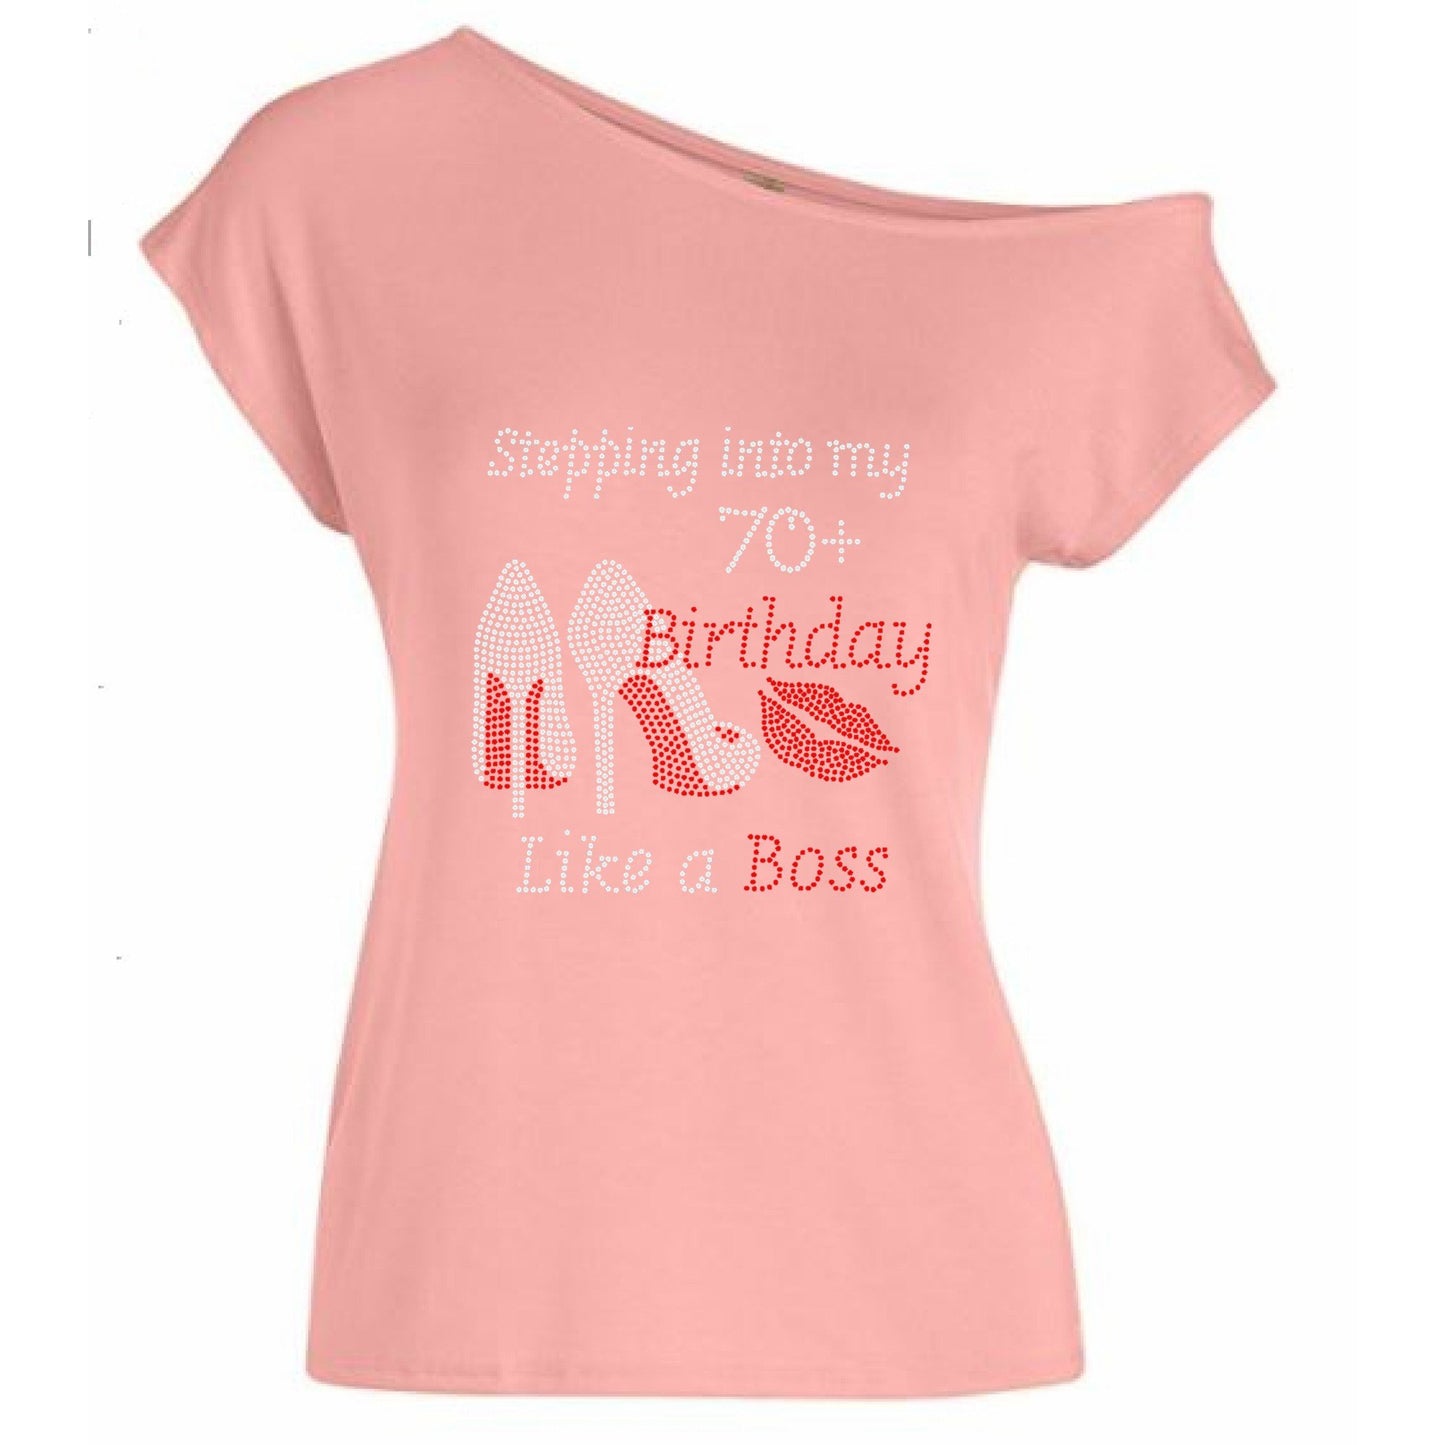 Stepping Into My Birthday Like A Boss Personalized Rhinestone Off Shoulder Tee